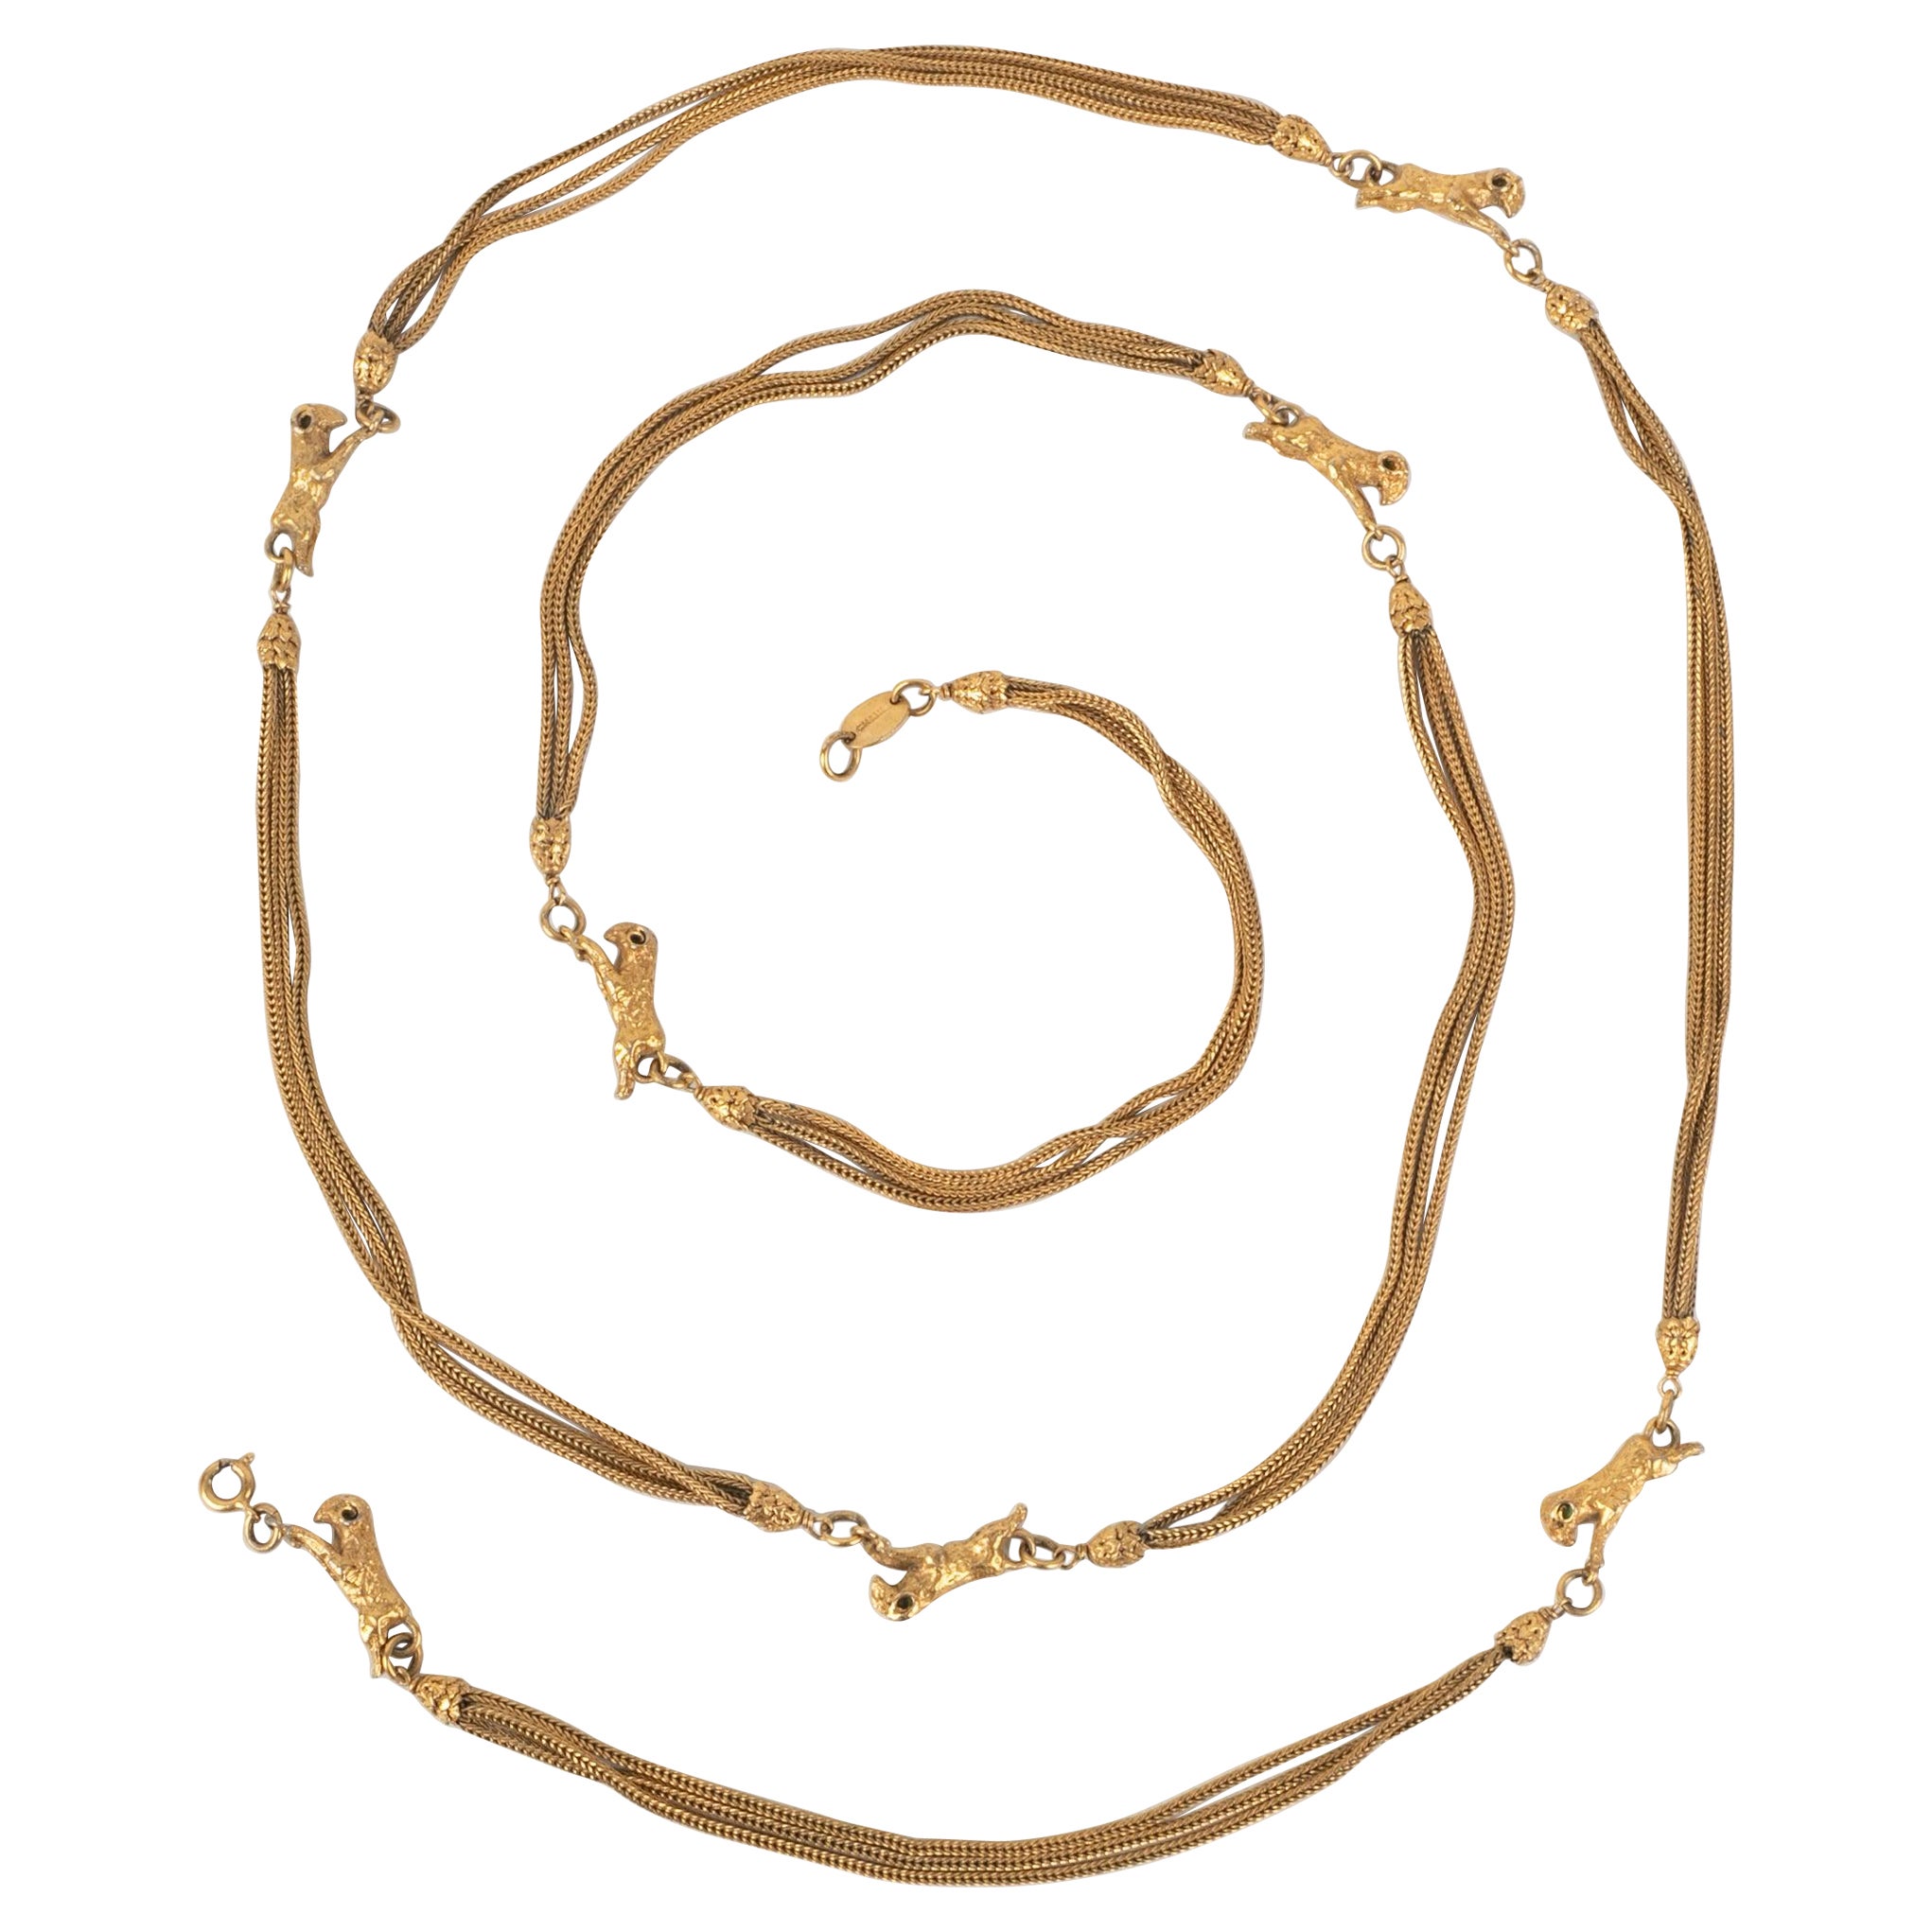 Chanel "Ram Head" Long Sautoir Necklace in Golden Metal, 1970s For Sale